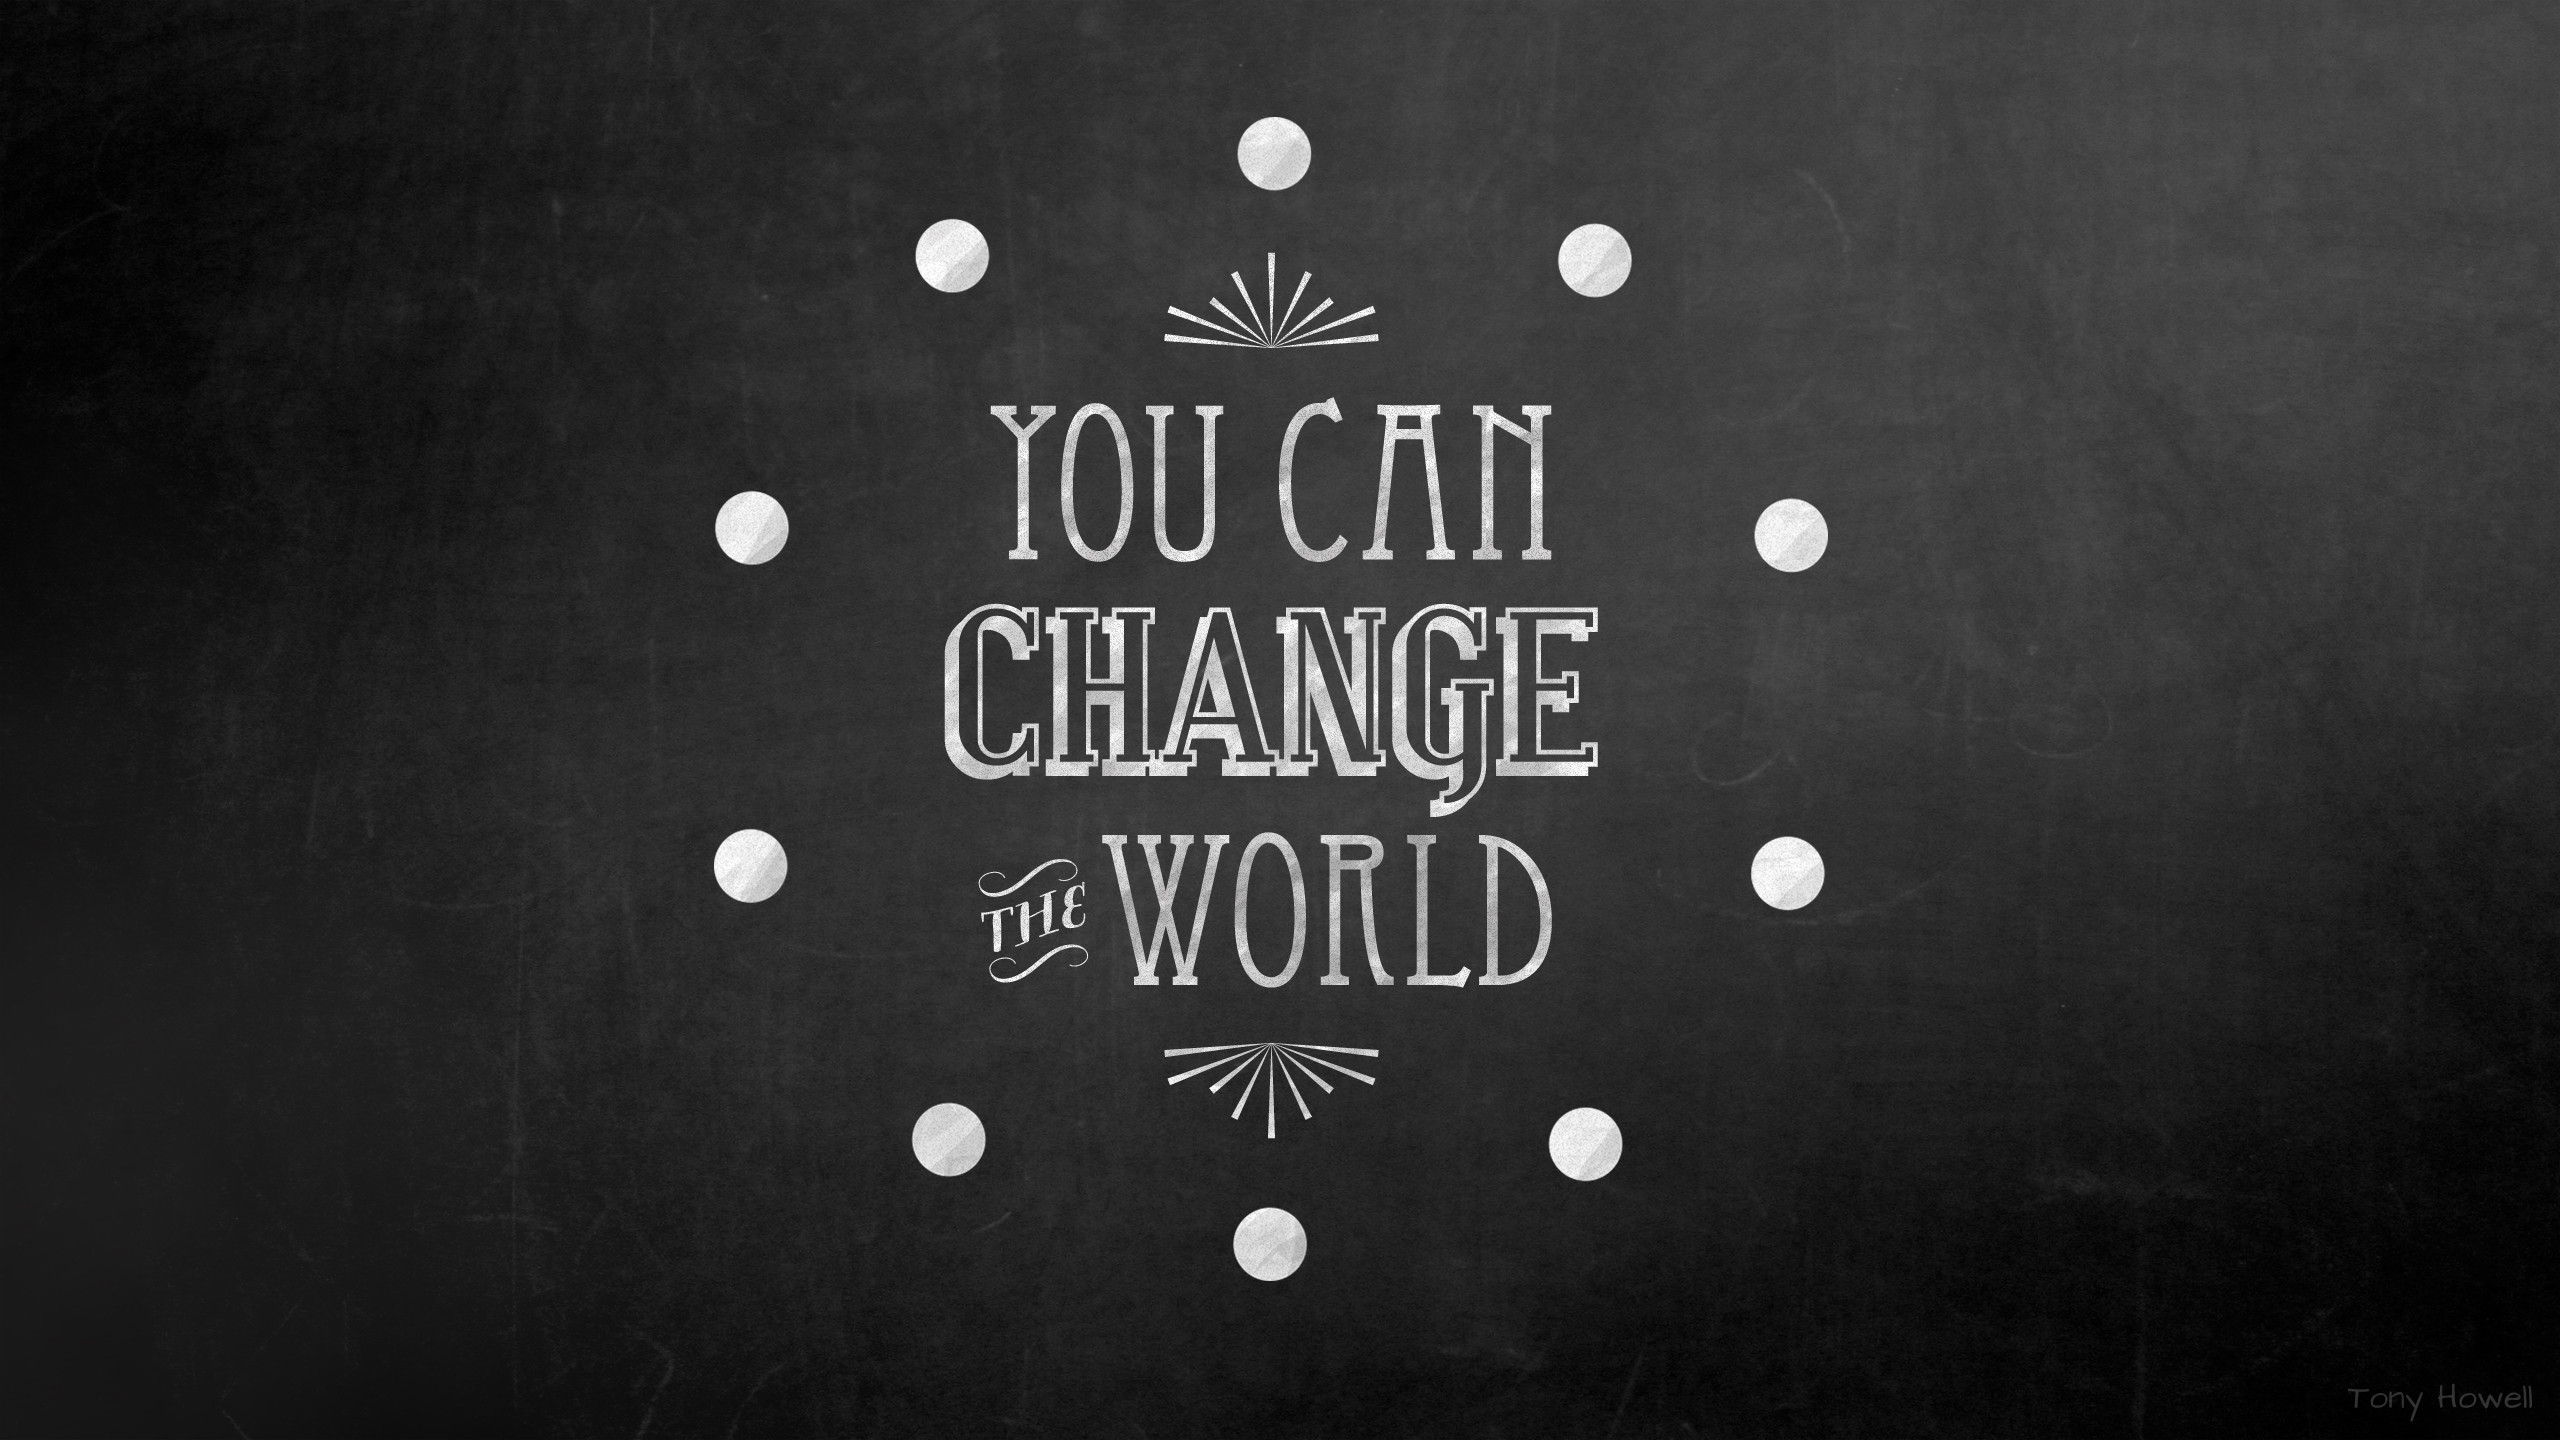 2560x1440 You Can Change the World | #desktop #wallpaper #quote | wallpaper |  Pinterest | Inspirational, Buddhism and Wisdom